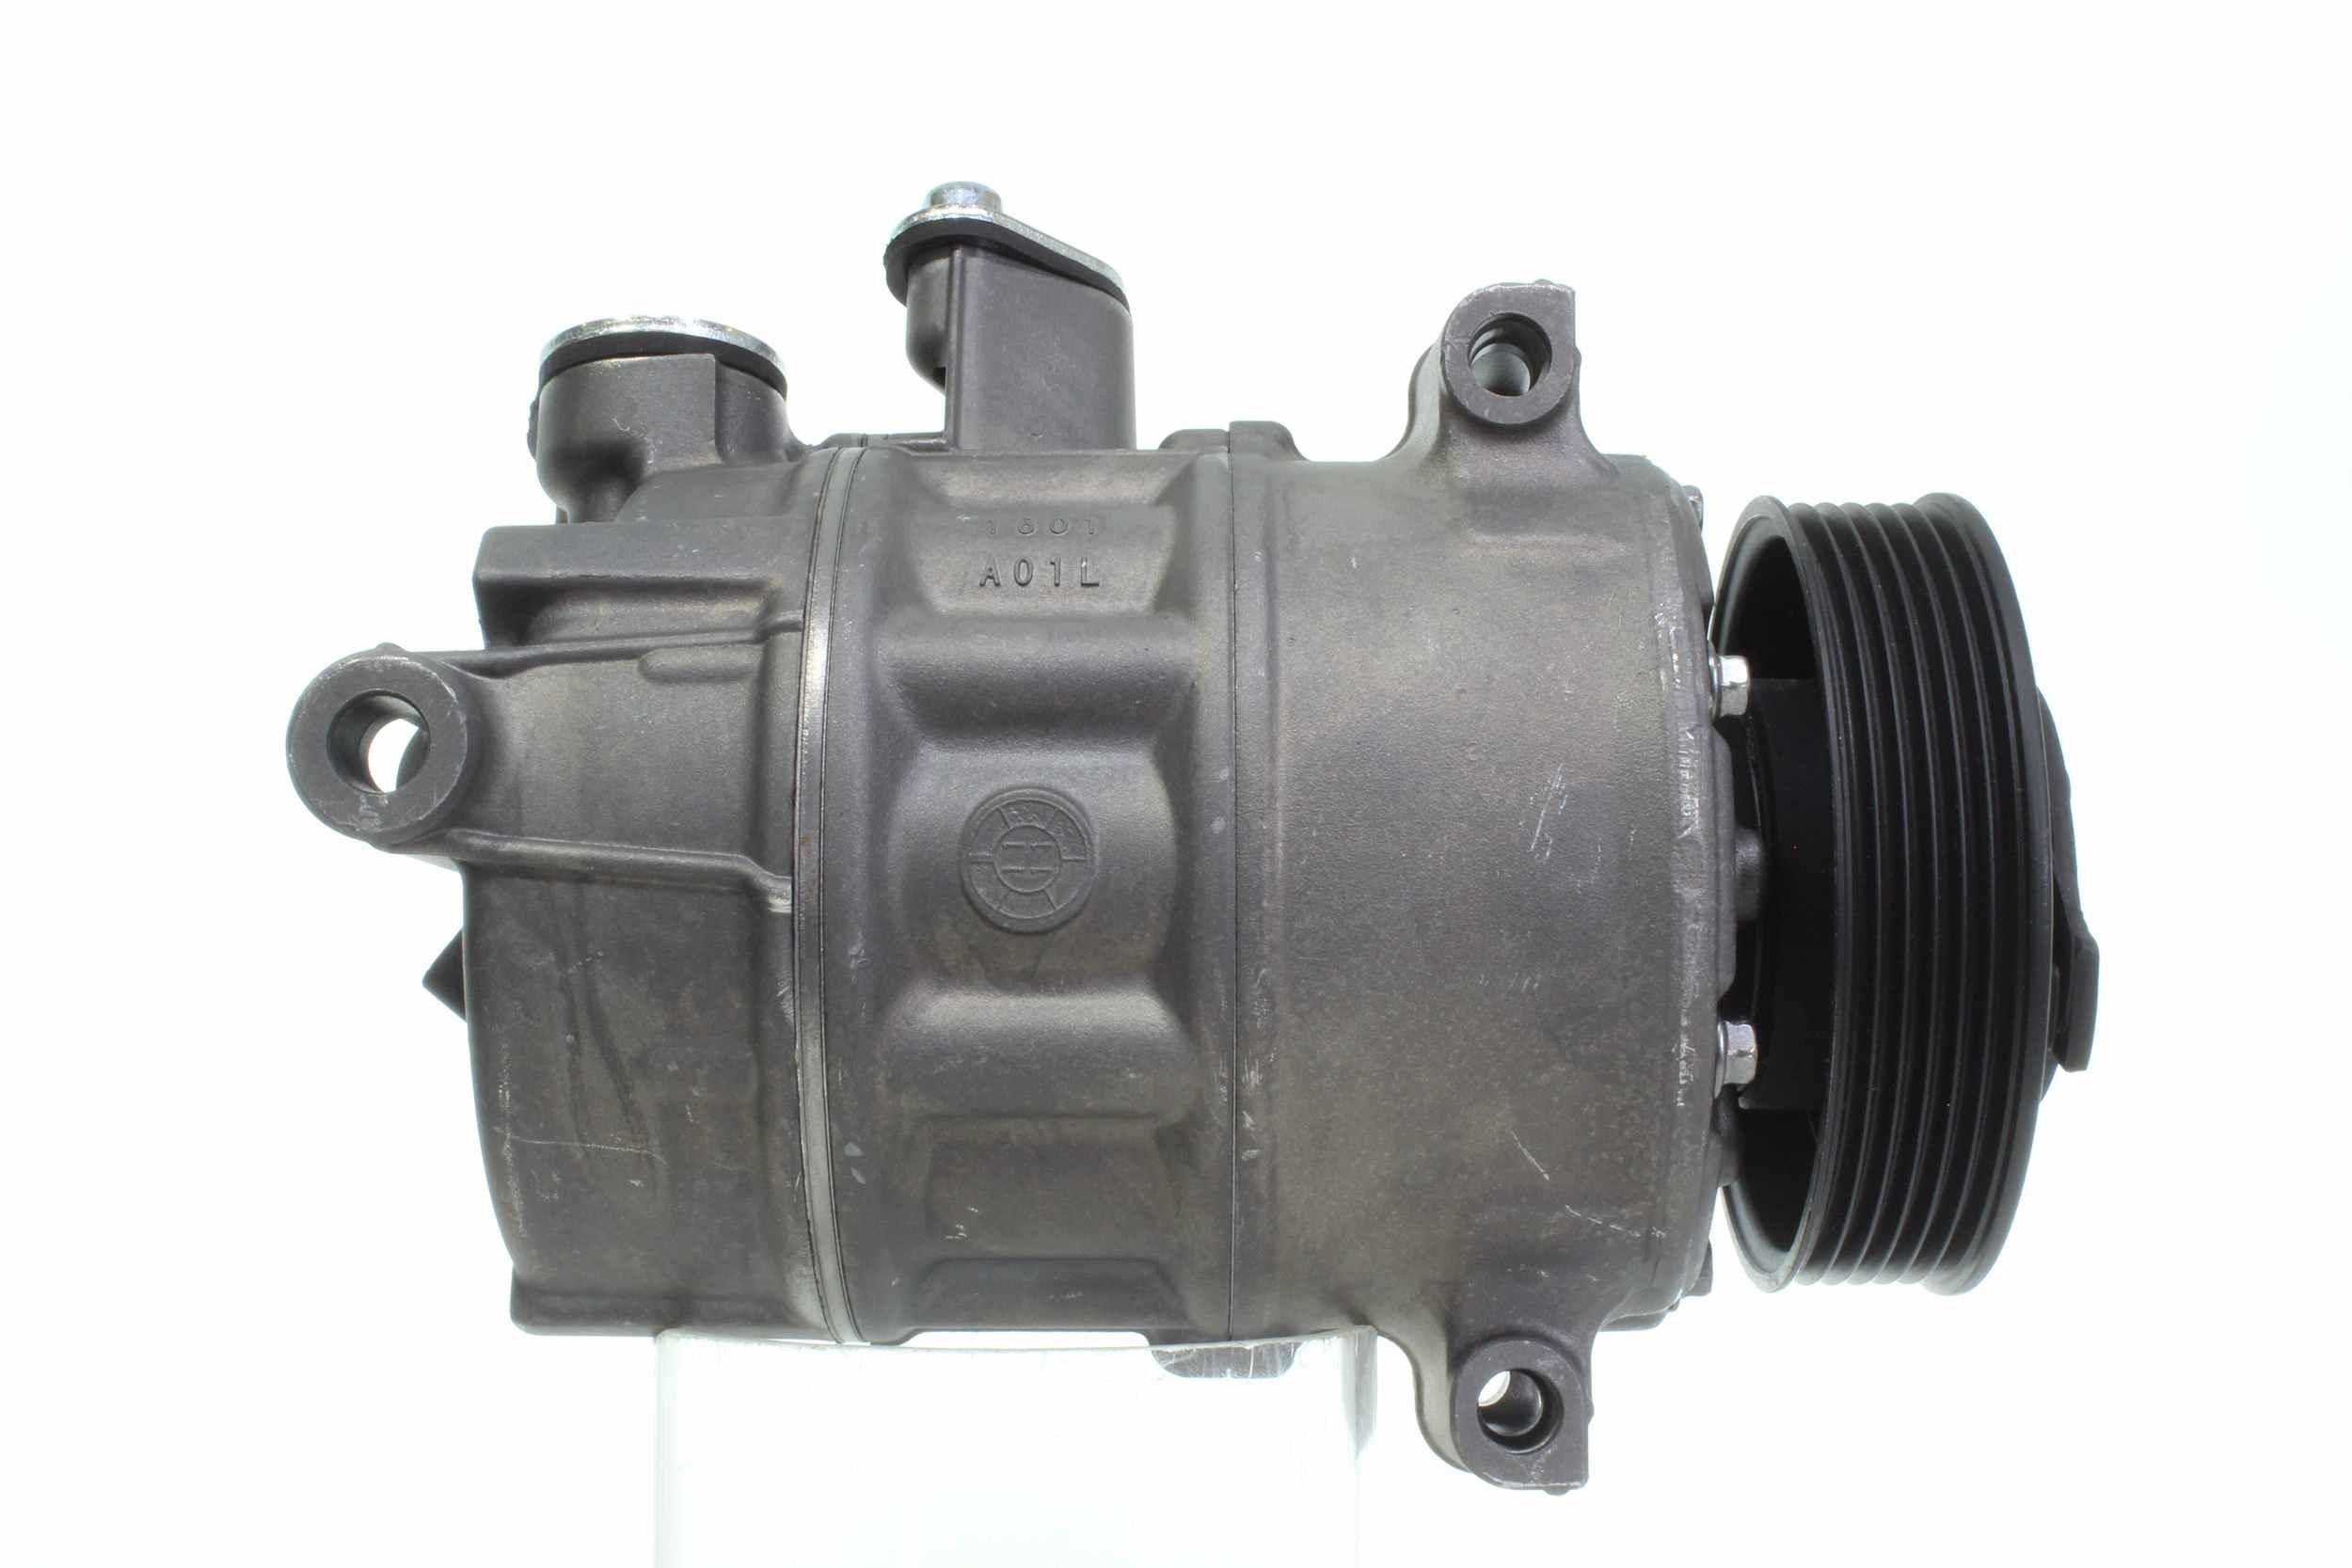 10551522 Compressor, air conditioning 551522 ALANKO PXE16, PAG 46, R 134a